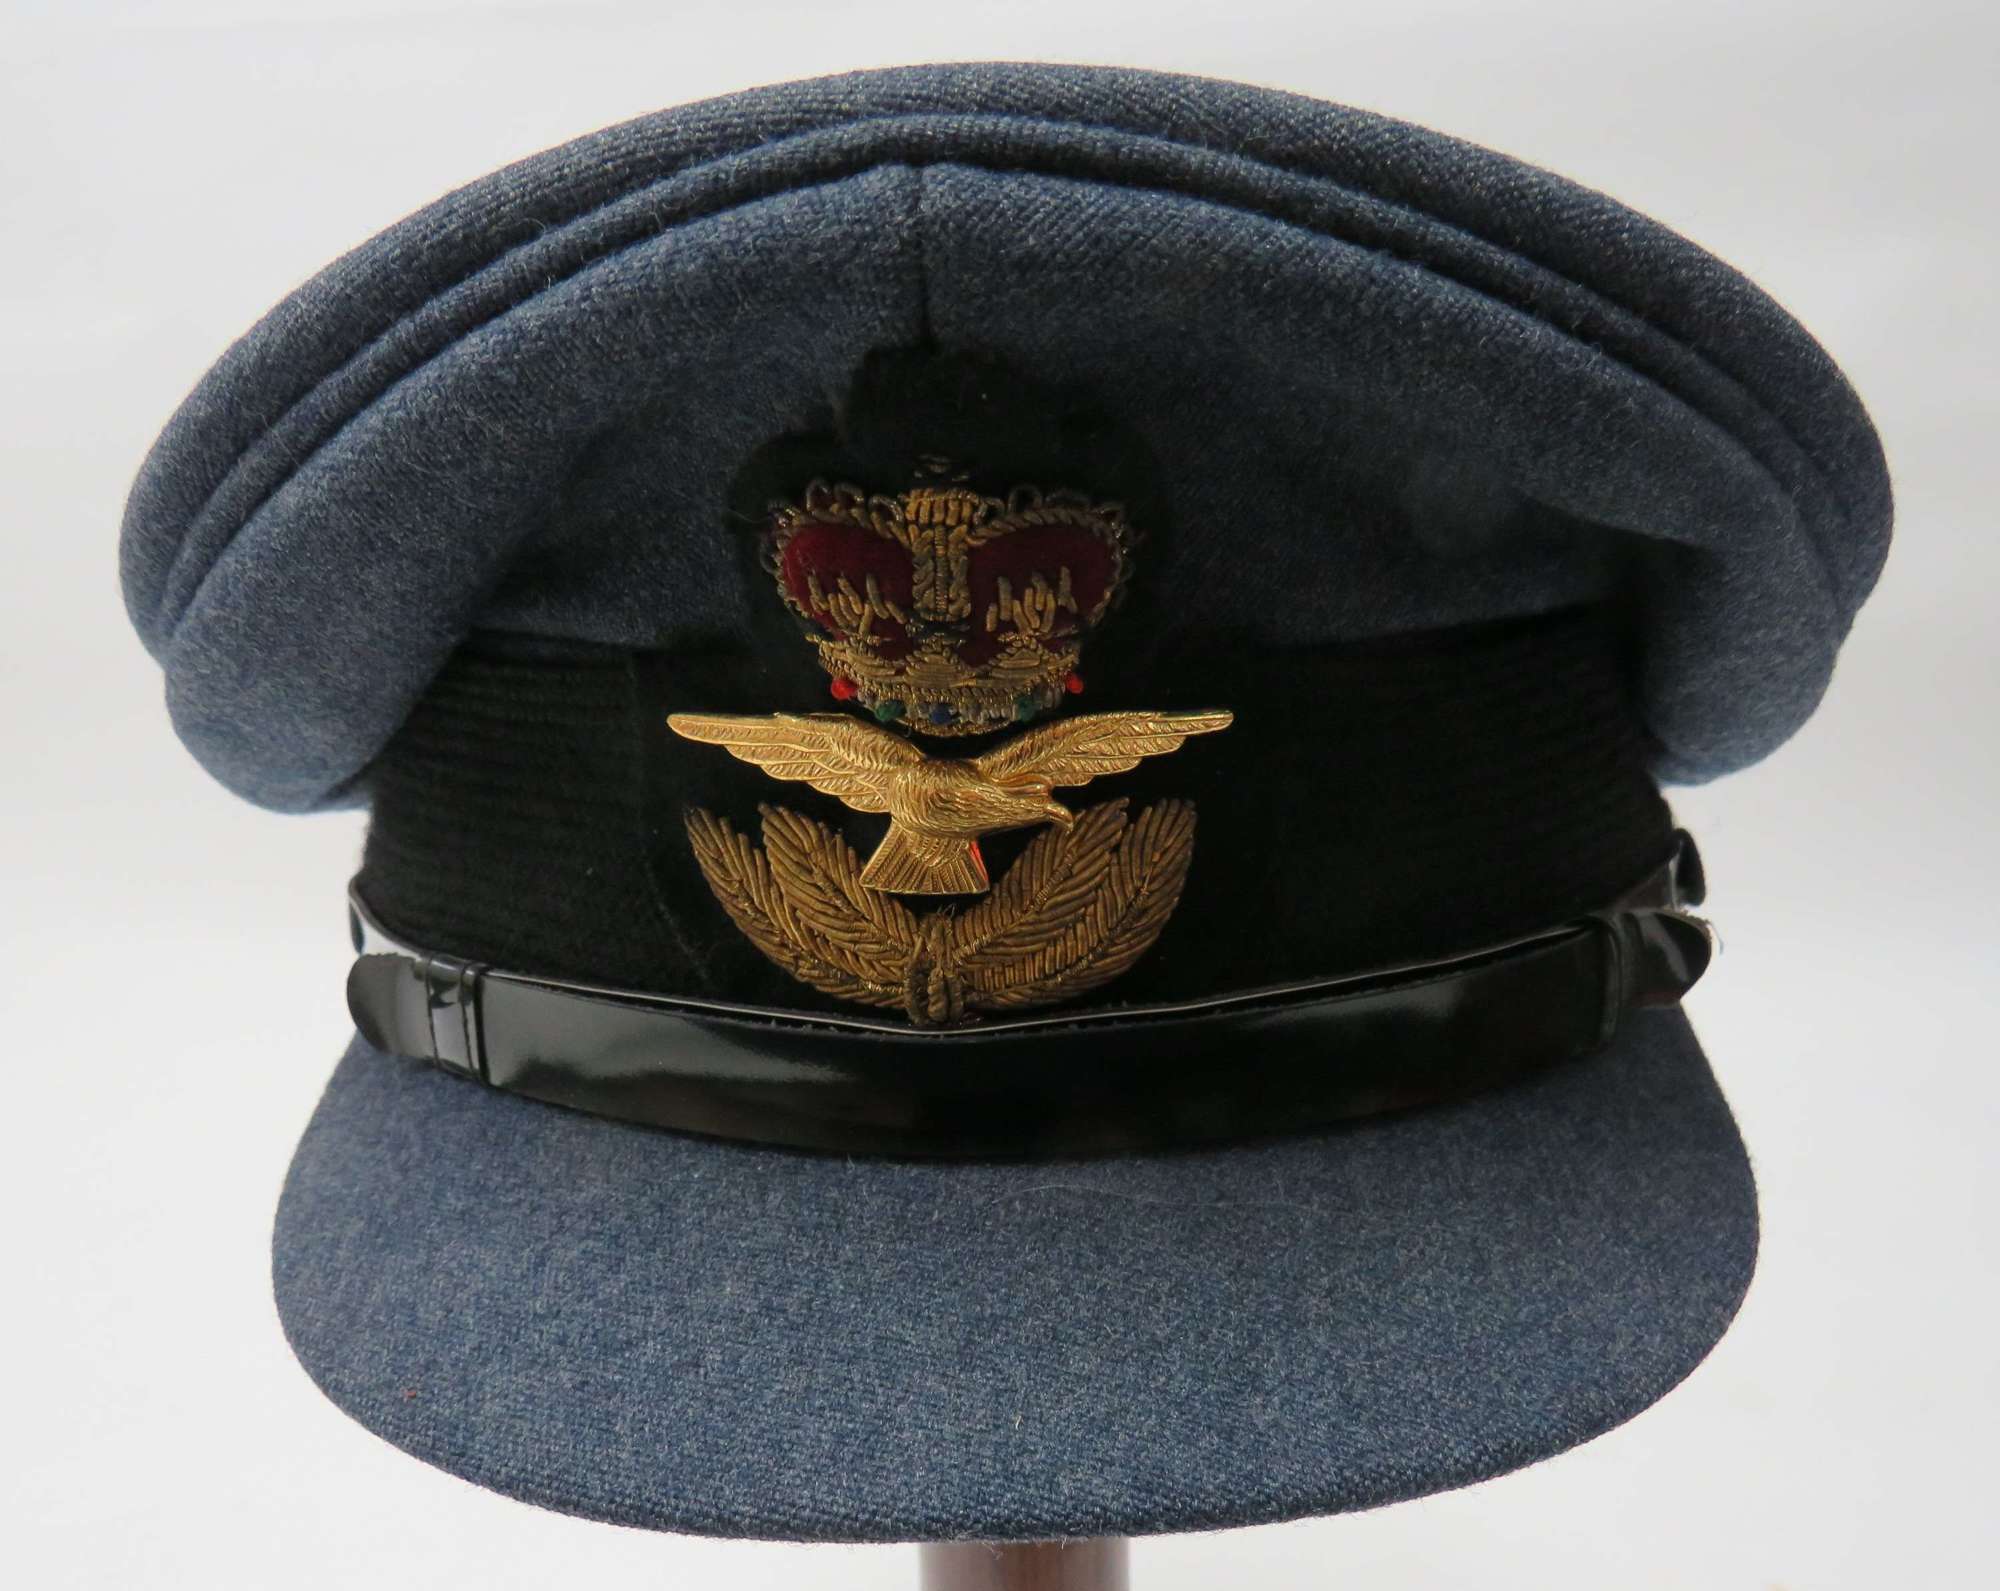 Post 1953 Royal Air Force Officers Service Dress Cap